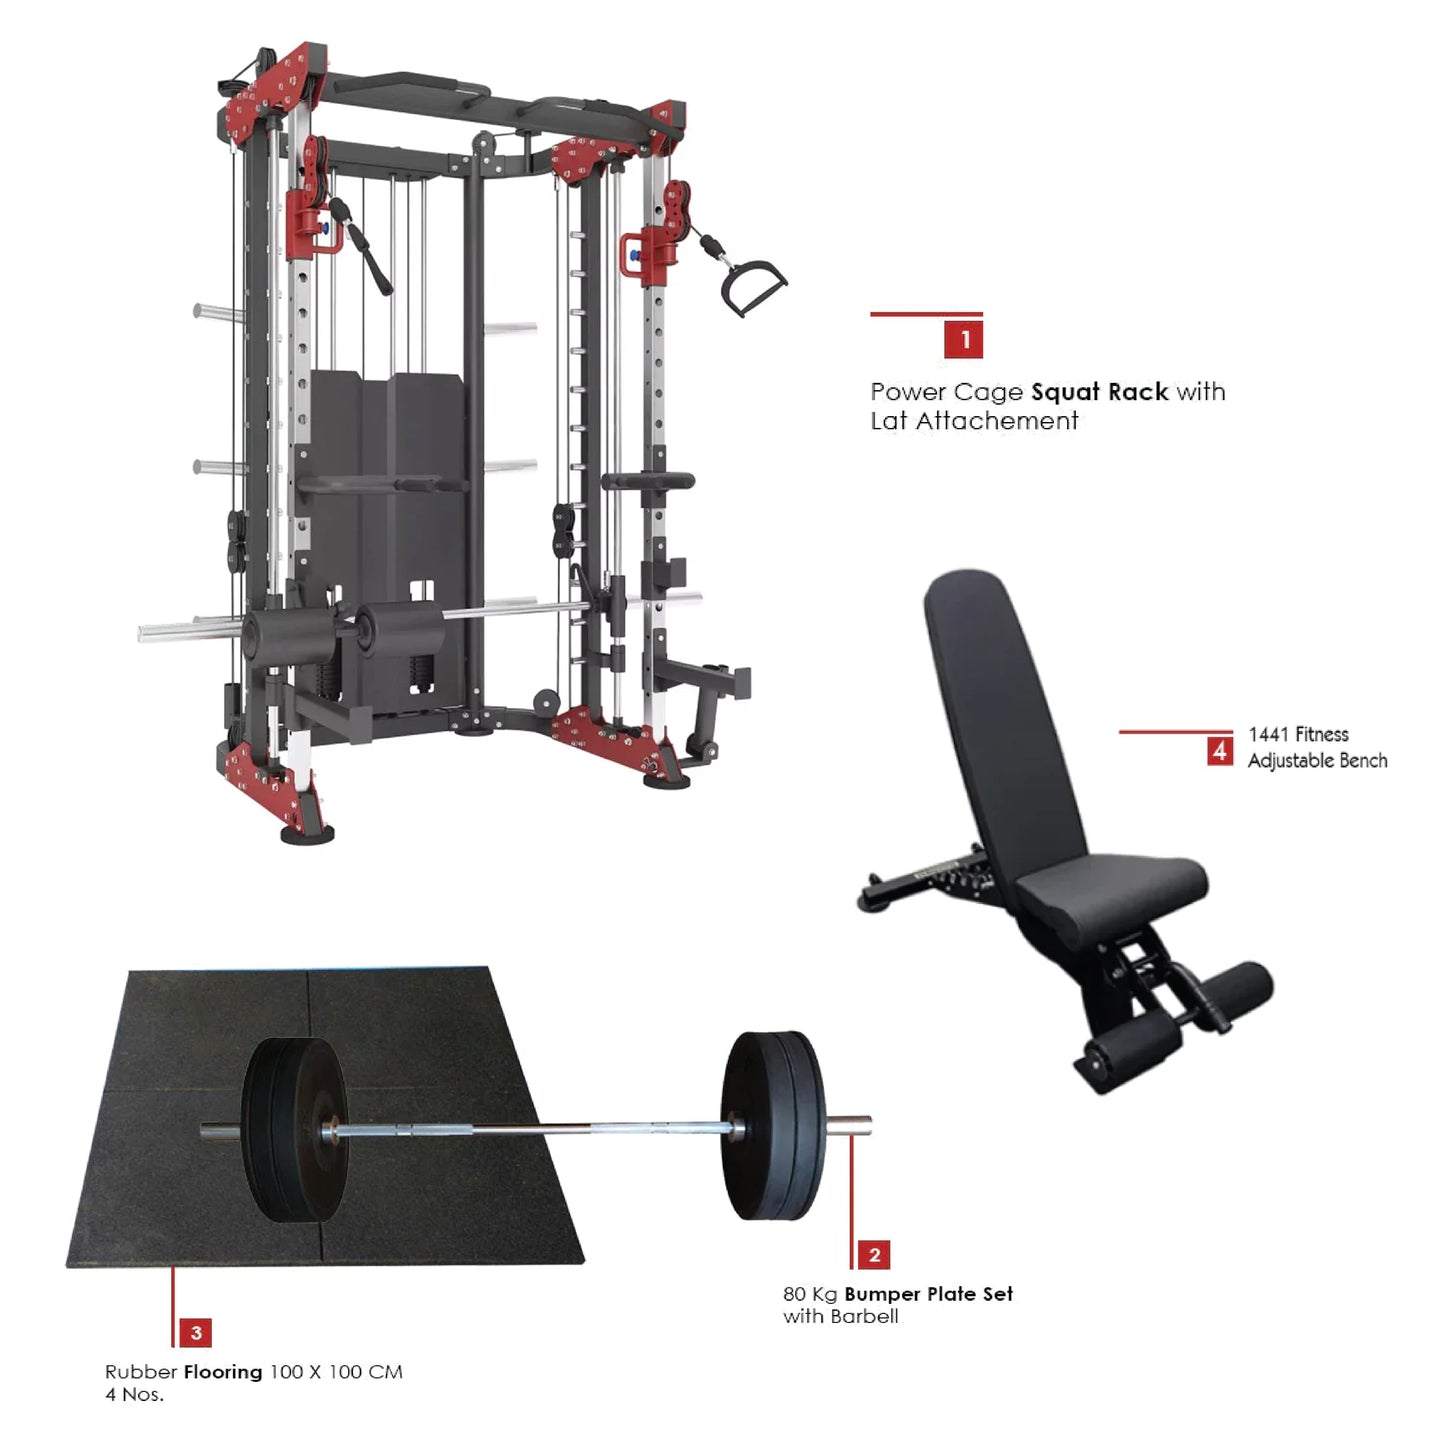 Combo Deal | 1441 Fitness Functional Trainer With Smith Machine - 41FC81 + 80kg  Apus Bumper Plate Set + Adjustable Bench A8007 + 4 Gym Tile